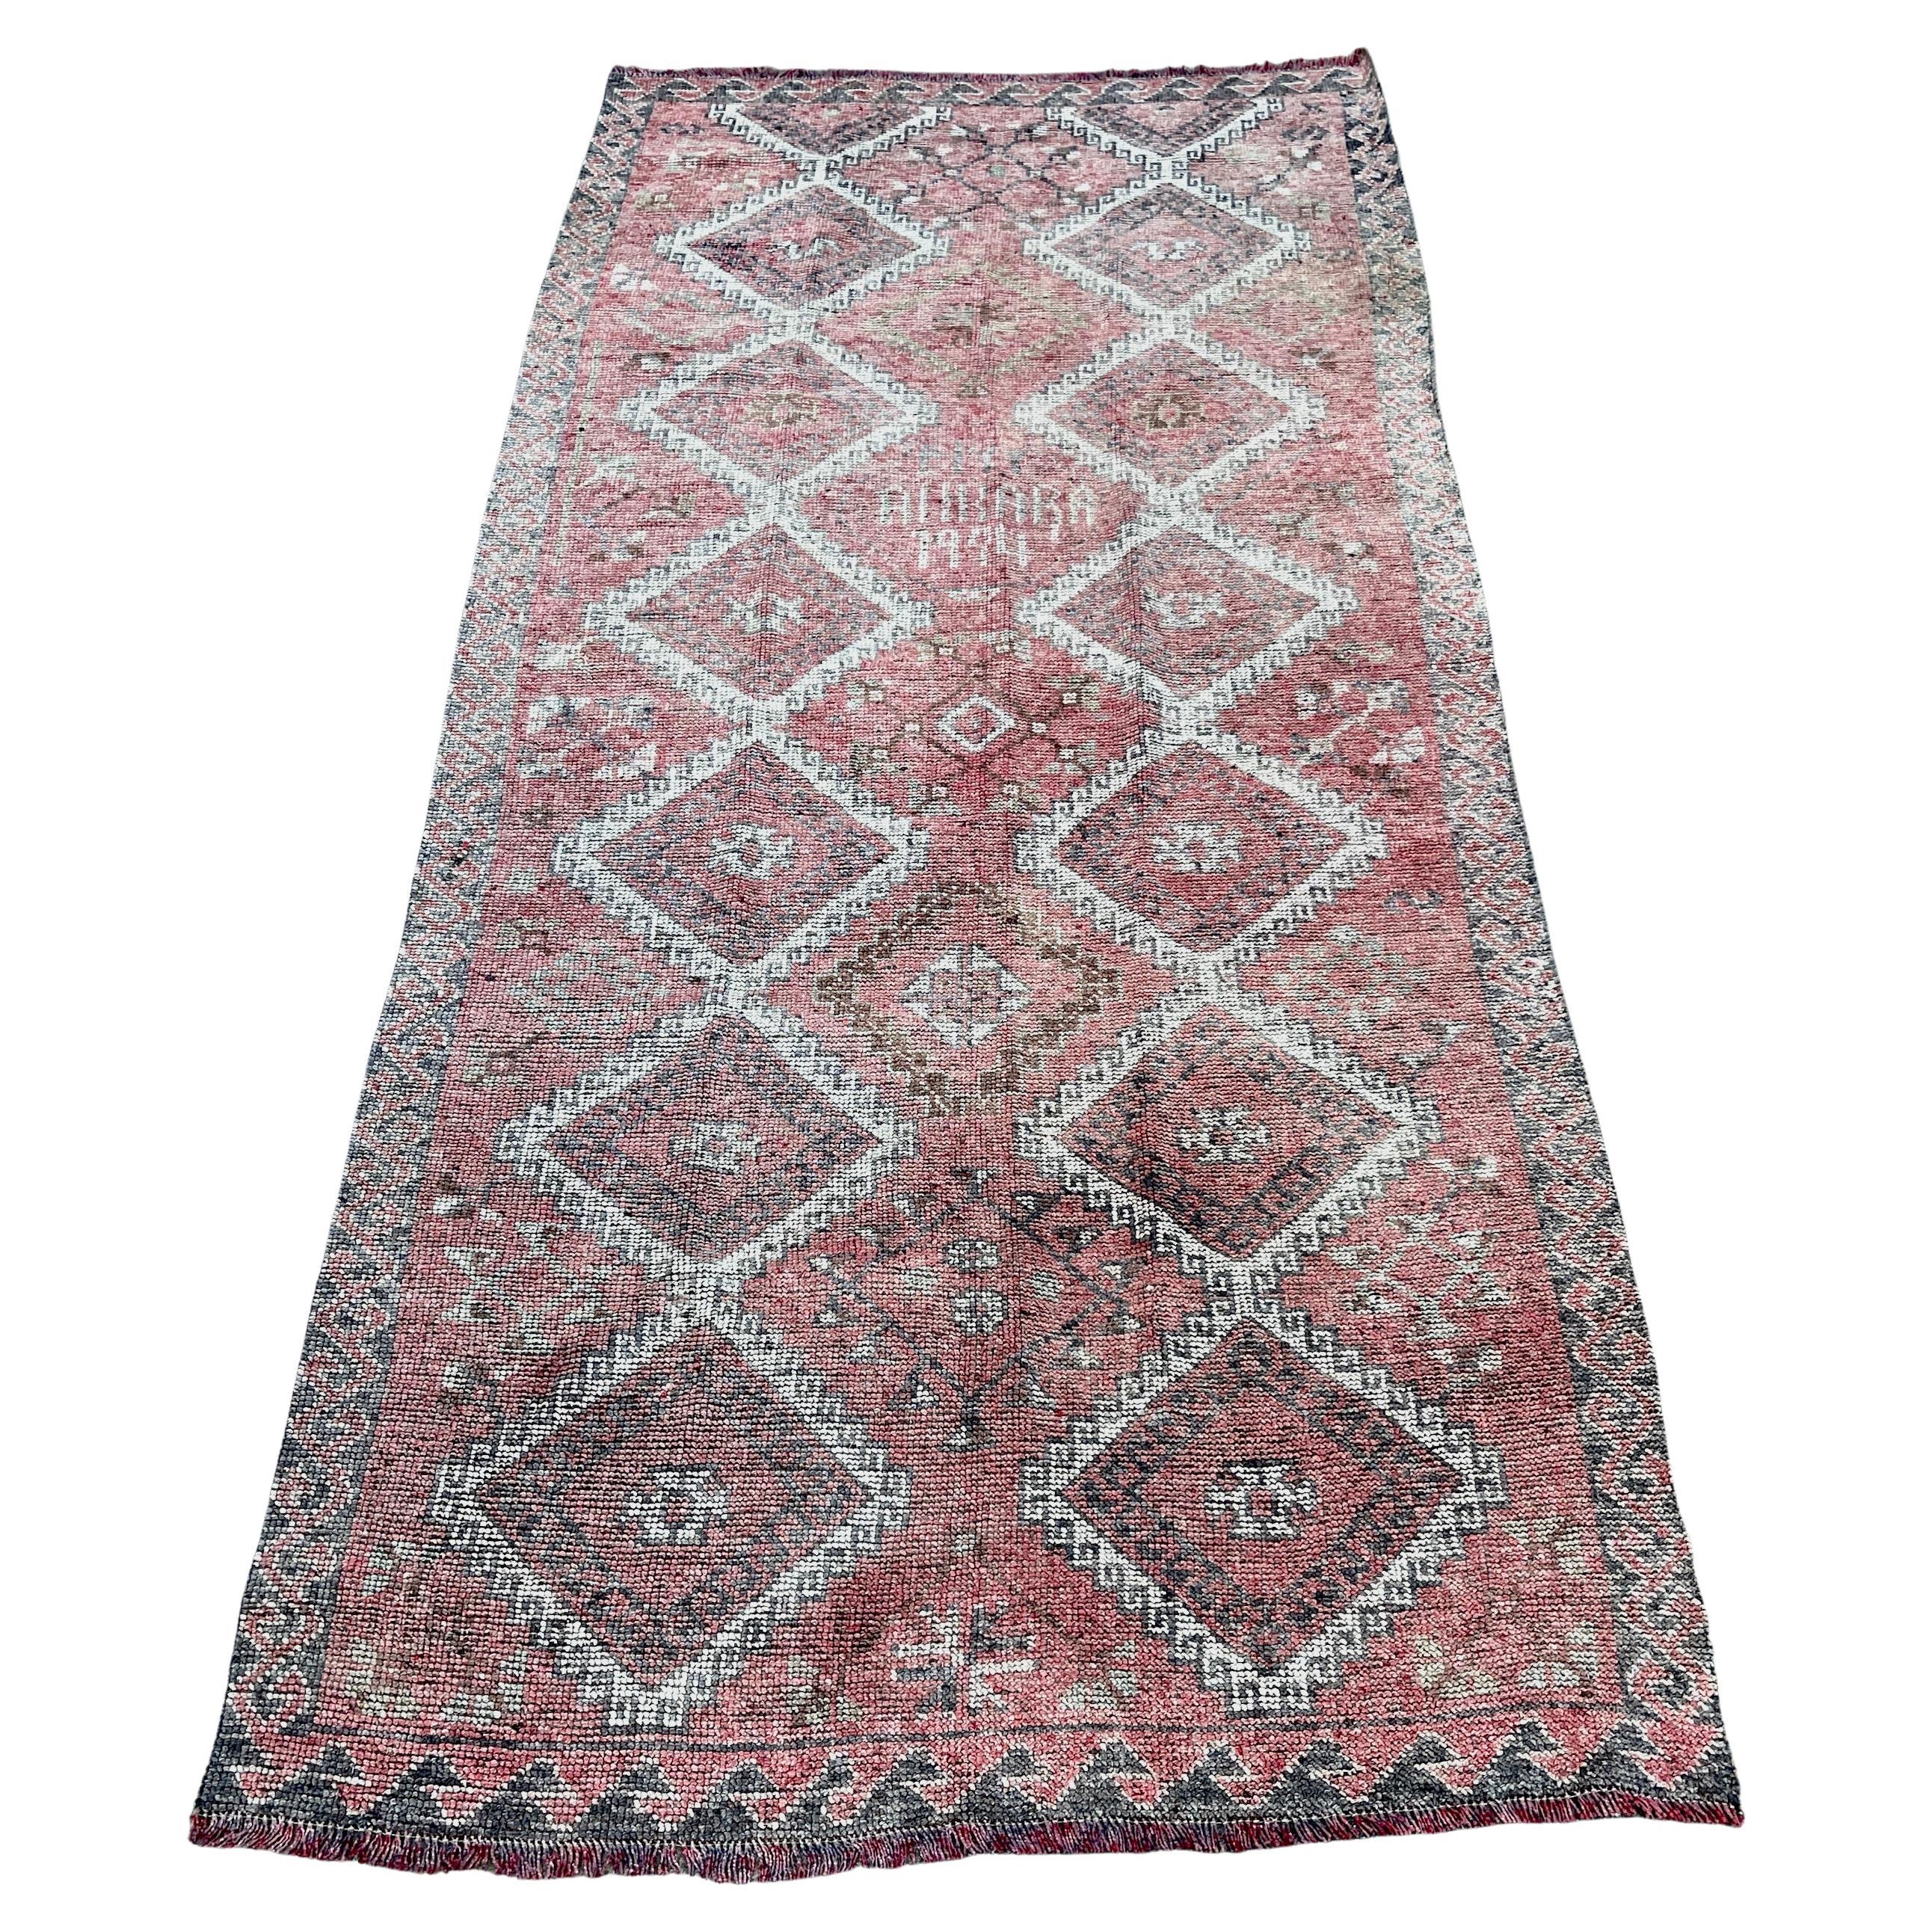 Distressed Hand-Knotted Wool Caucasian Rug 'Reservable' Signed & Dated 1994 For Sale